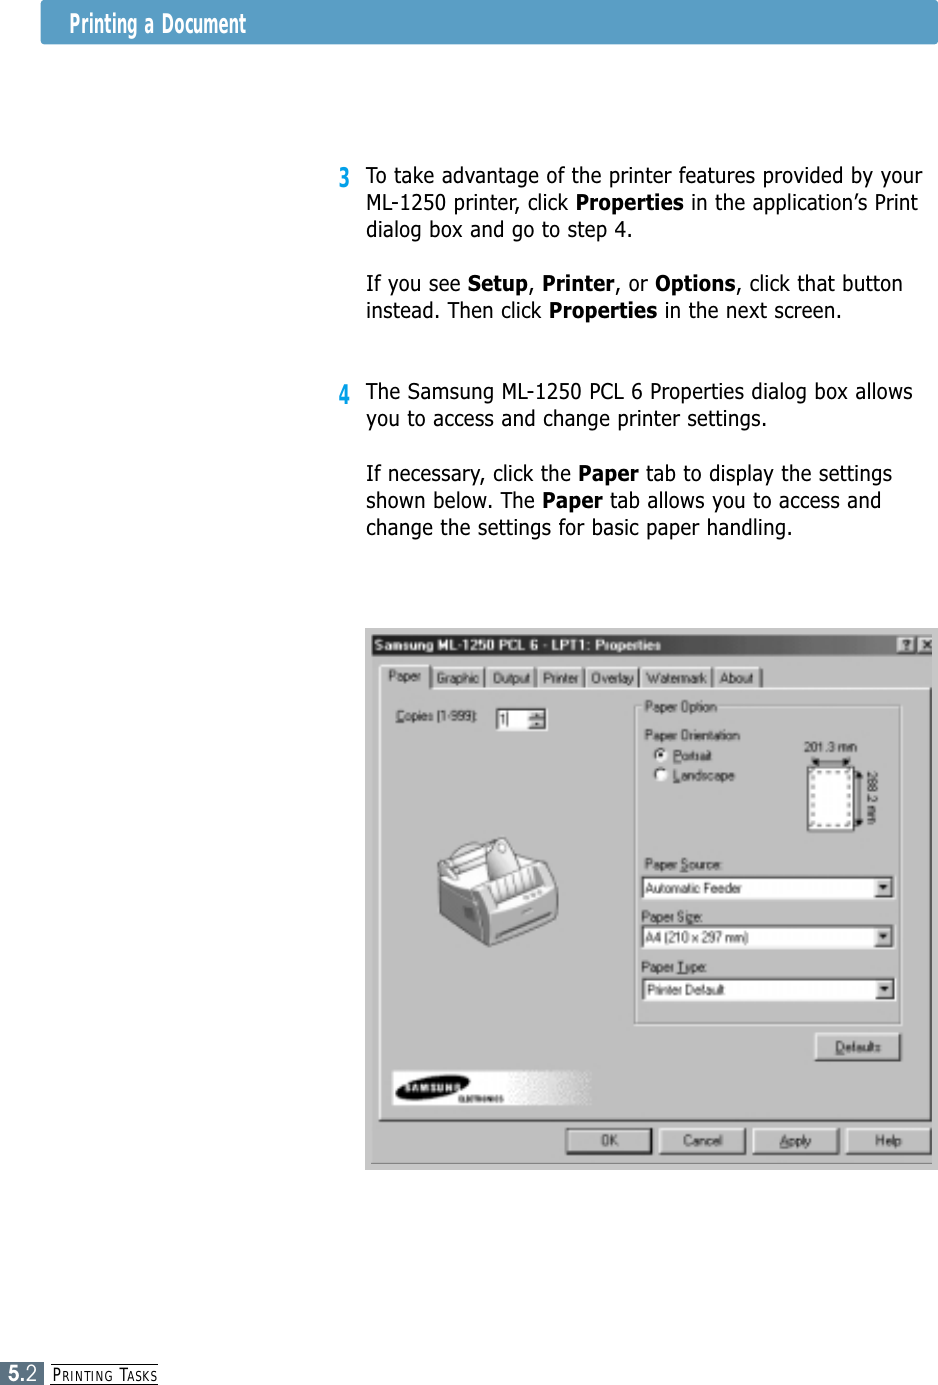 PRINTING TASKS5.2Printing a Document3To take advantage of the printer features provided by yourML-1250 printer, click Properties in the application’s Printdialog box and go to step 4. If you see Setup, Printer, or Options, click that buttoninstead. Then click Properties in the next screen.4The Samsung ML-1250 PCL 6 Properties dialog box allowsyou to access and change printer settings.If necessary, click the Paper tab to display the settingsshown below. The Paper tab allows you to access andchange the settings for basic paper handling.